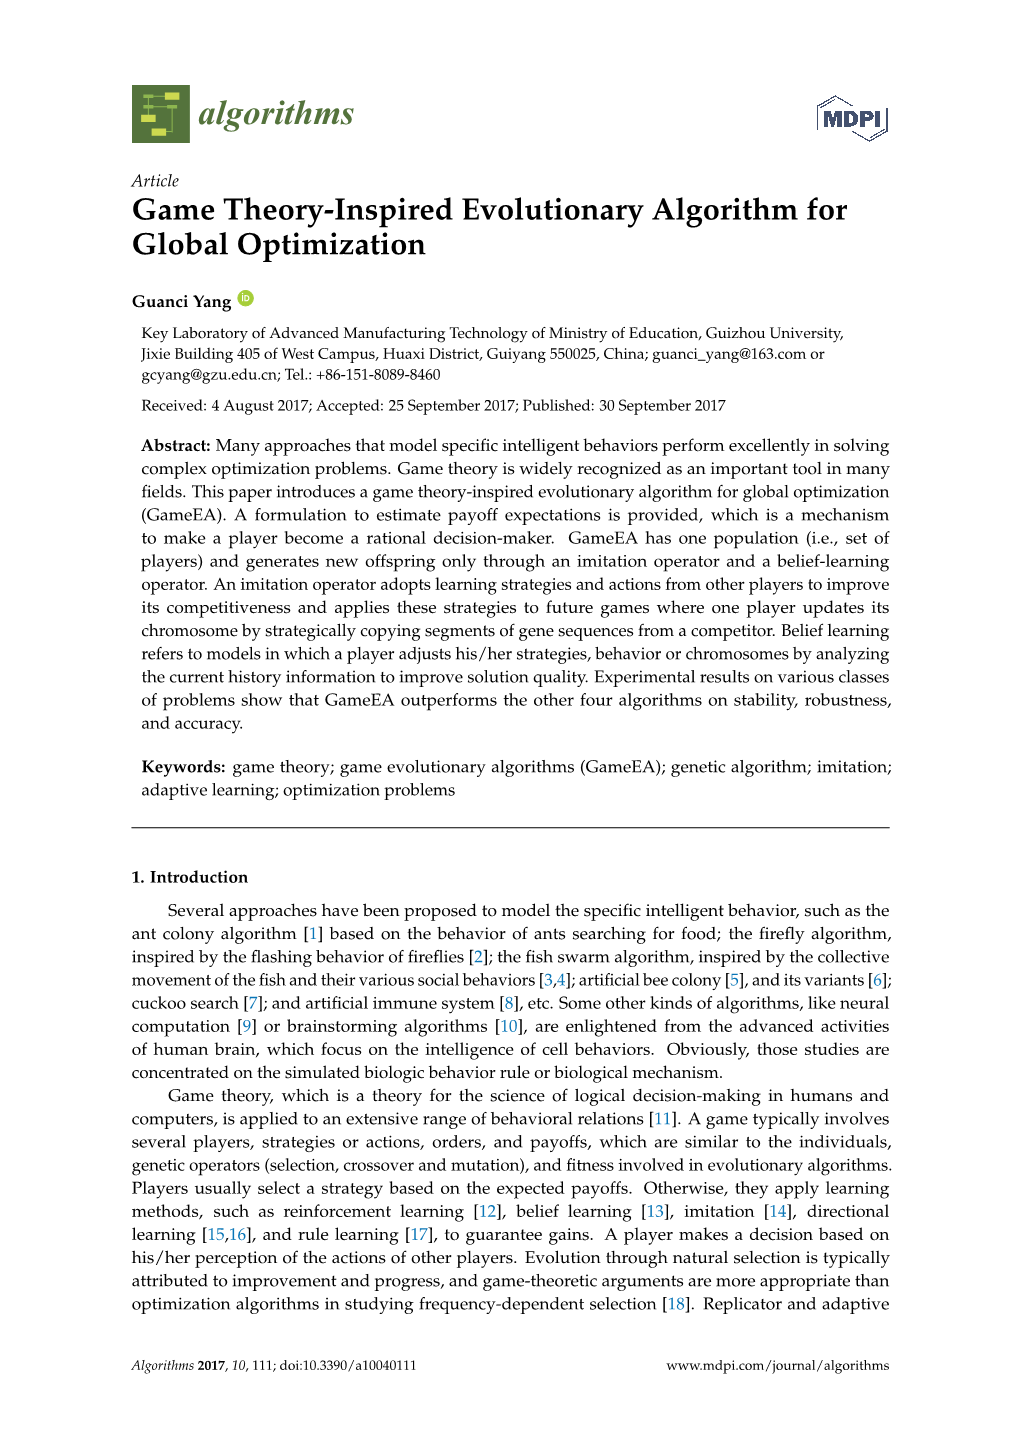 Game Theory-Inspired Evolutionary Algorithm for Global Optimization